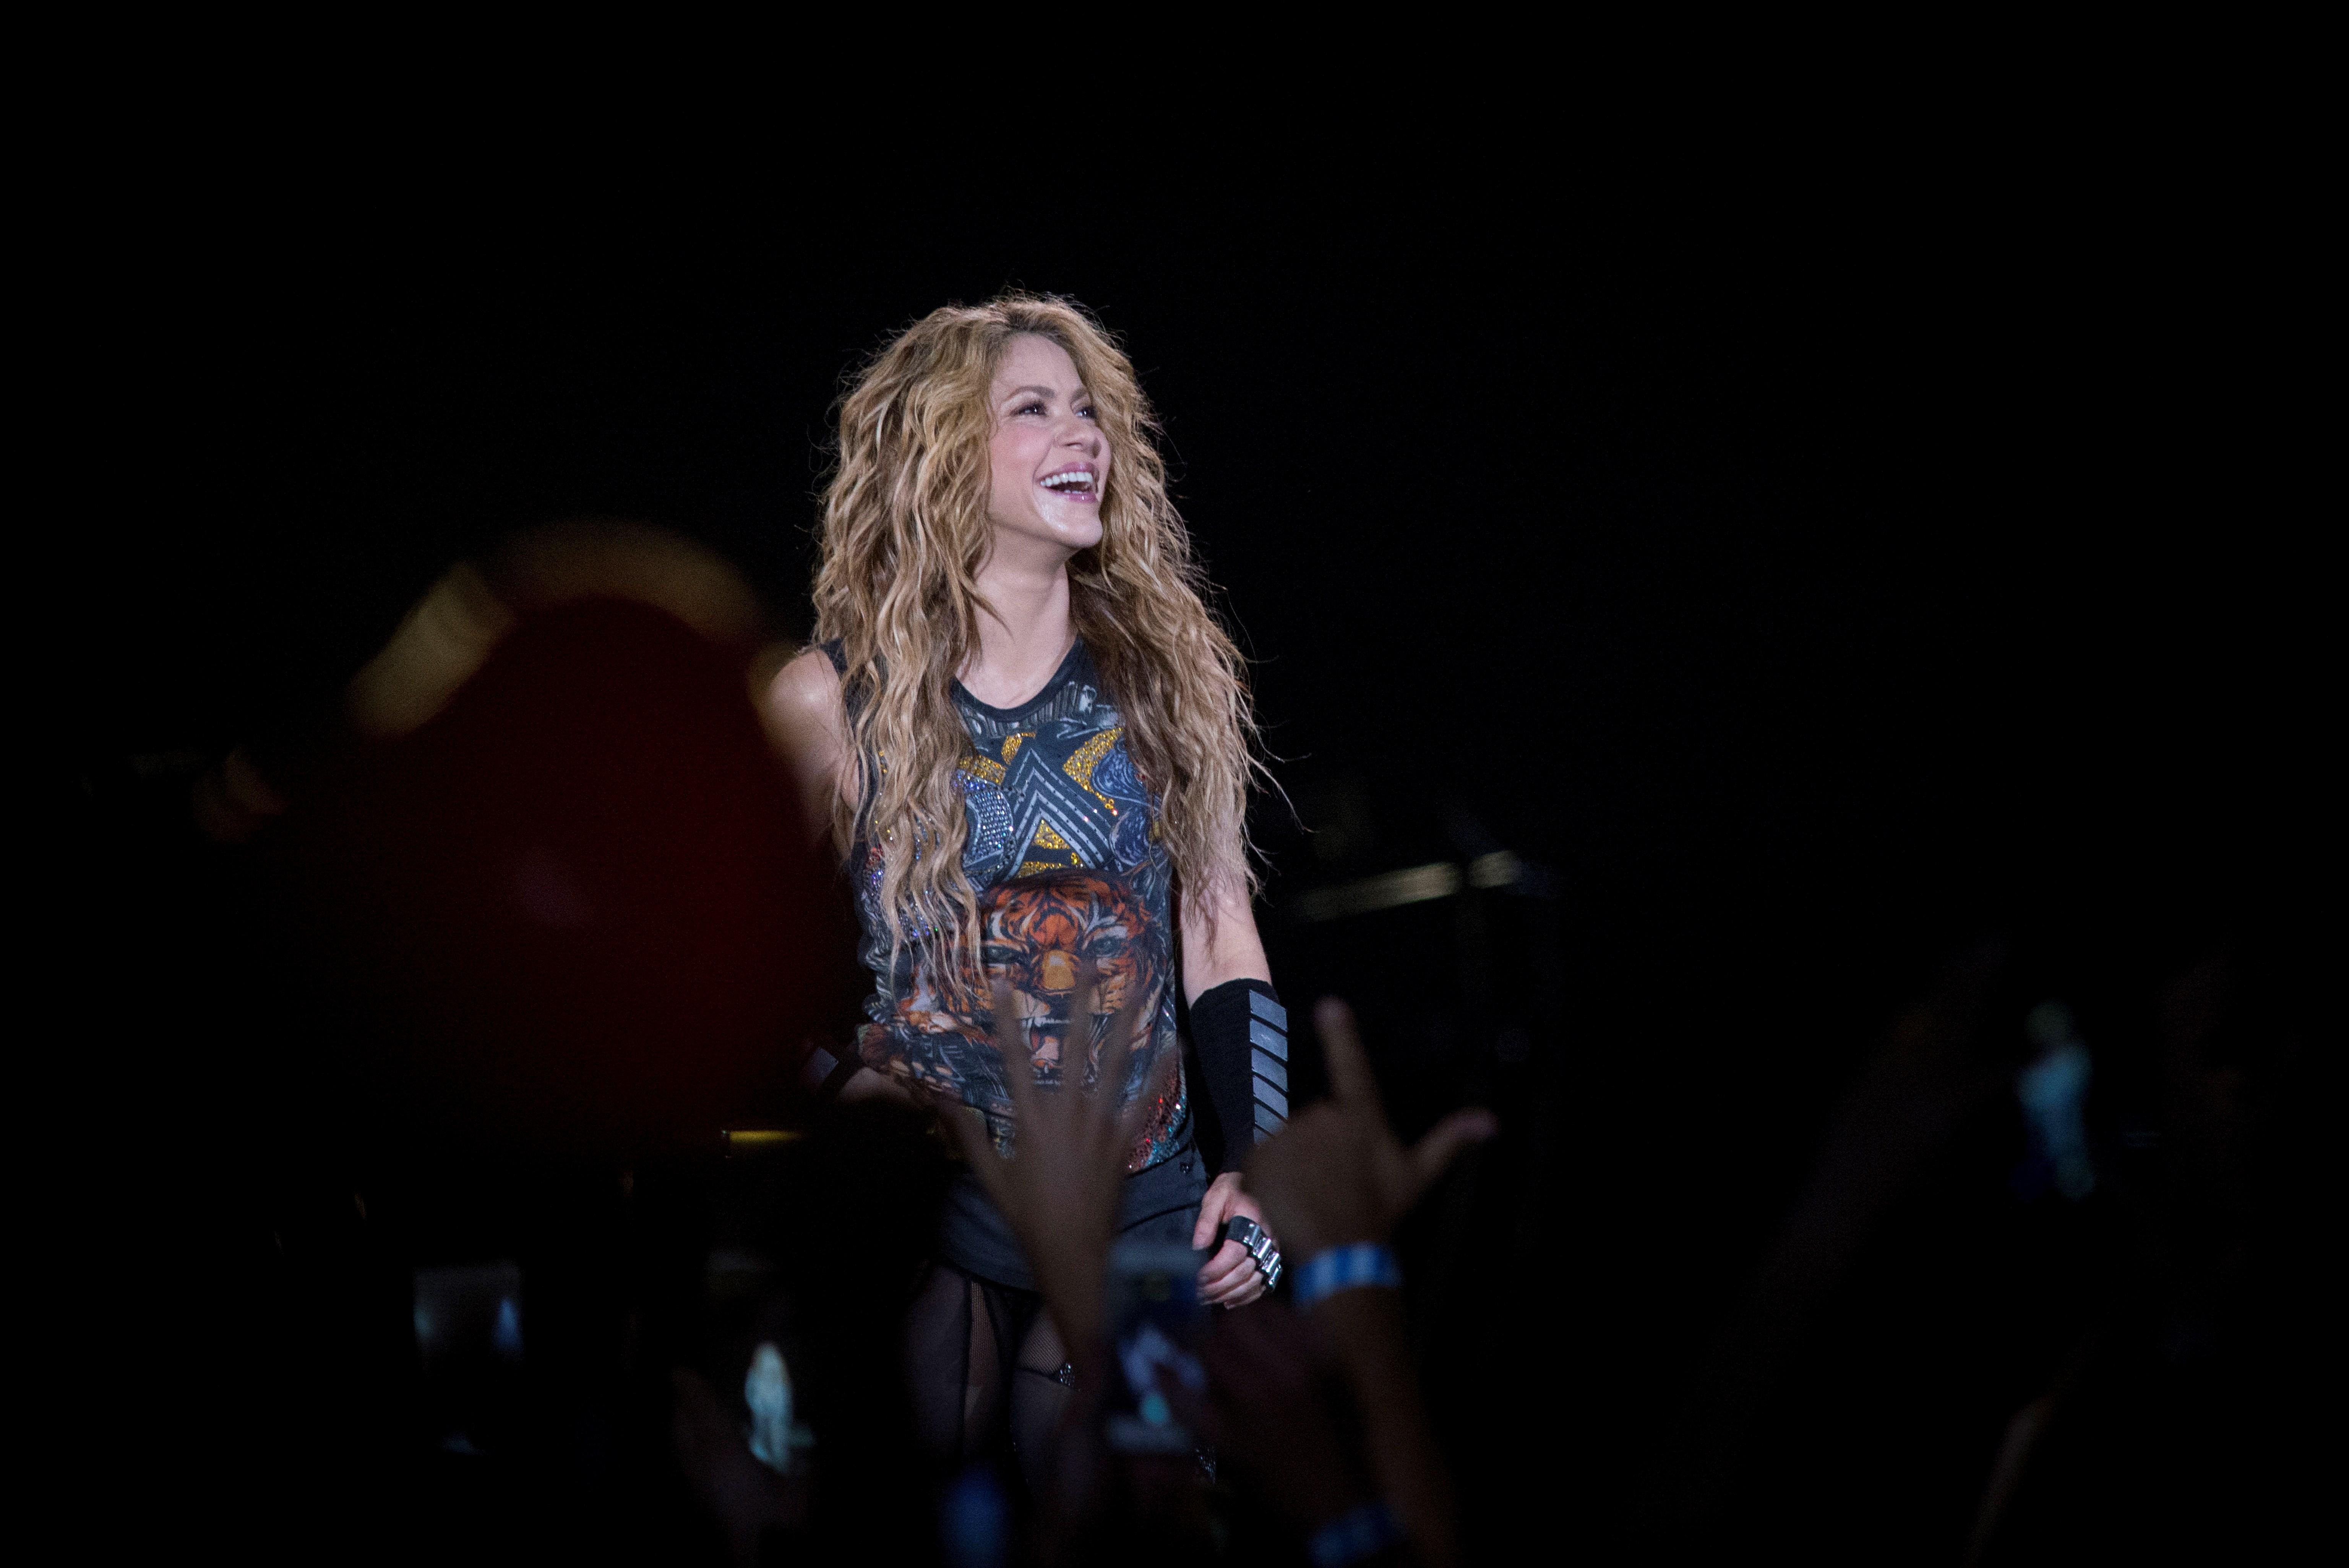 Lawsuit presented against Shakira on tax charges